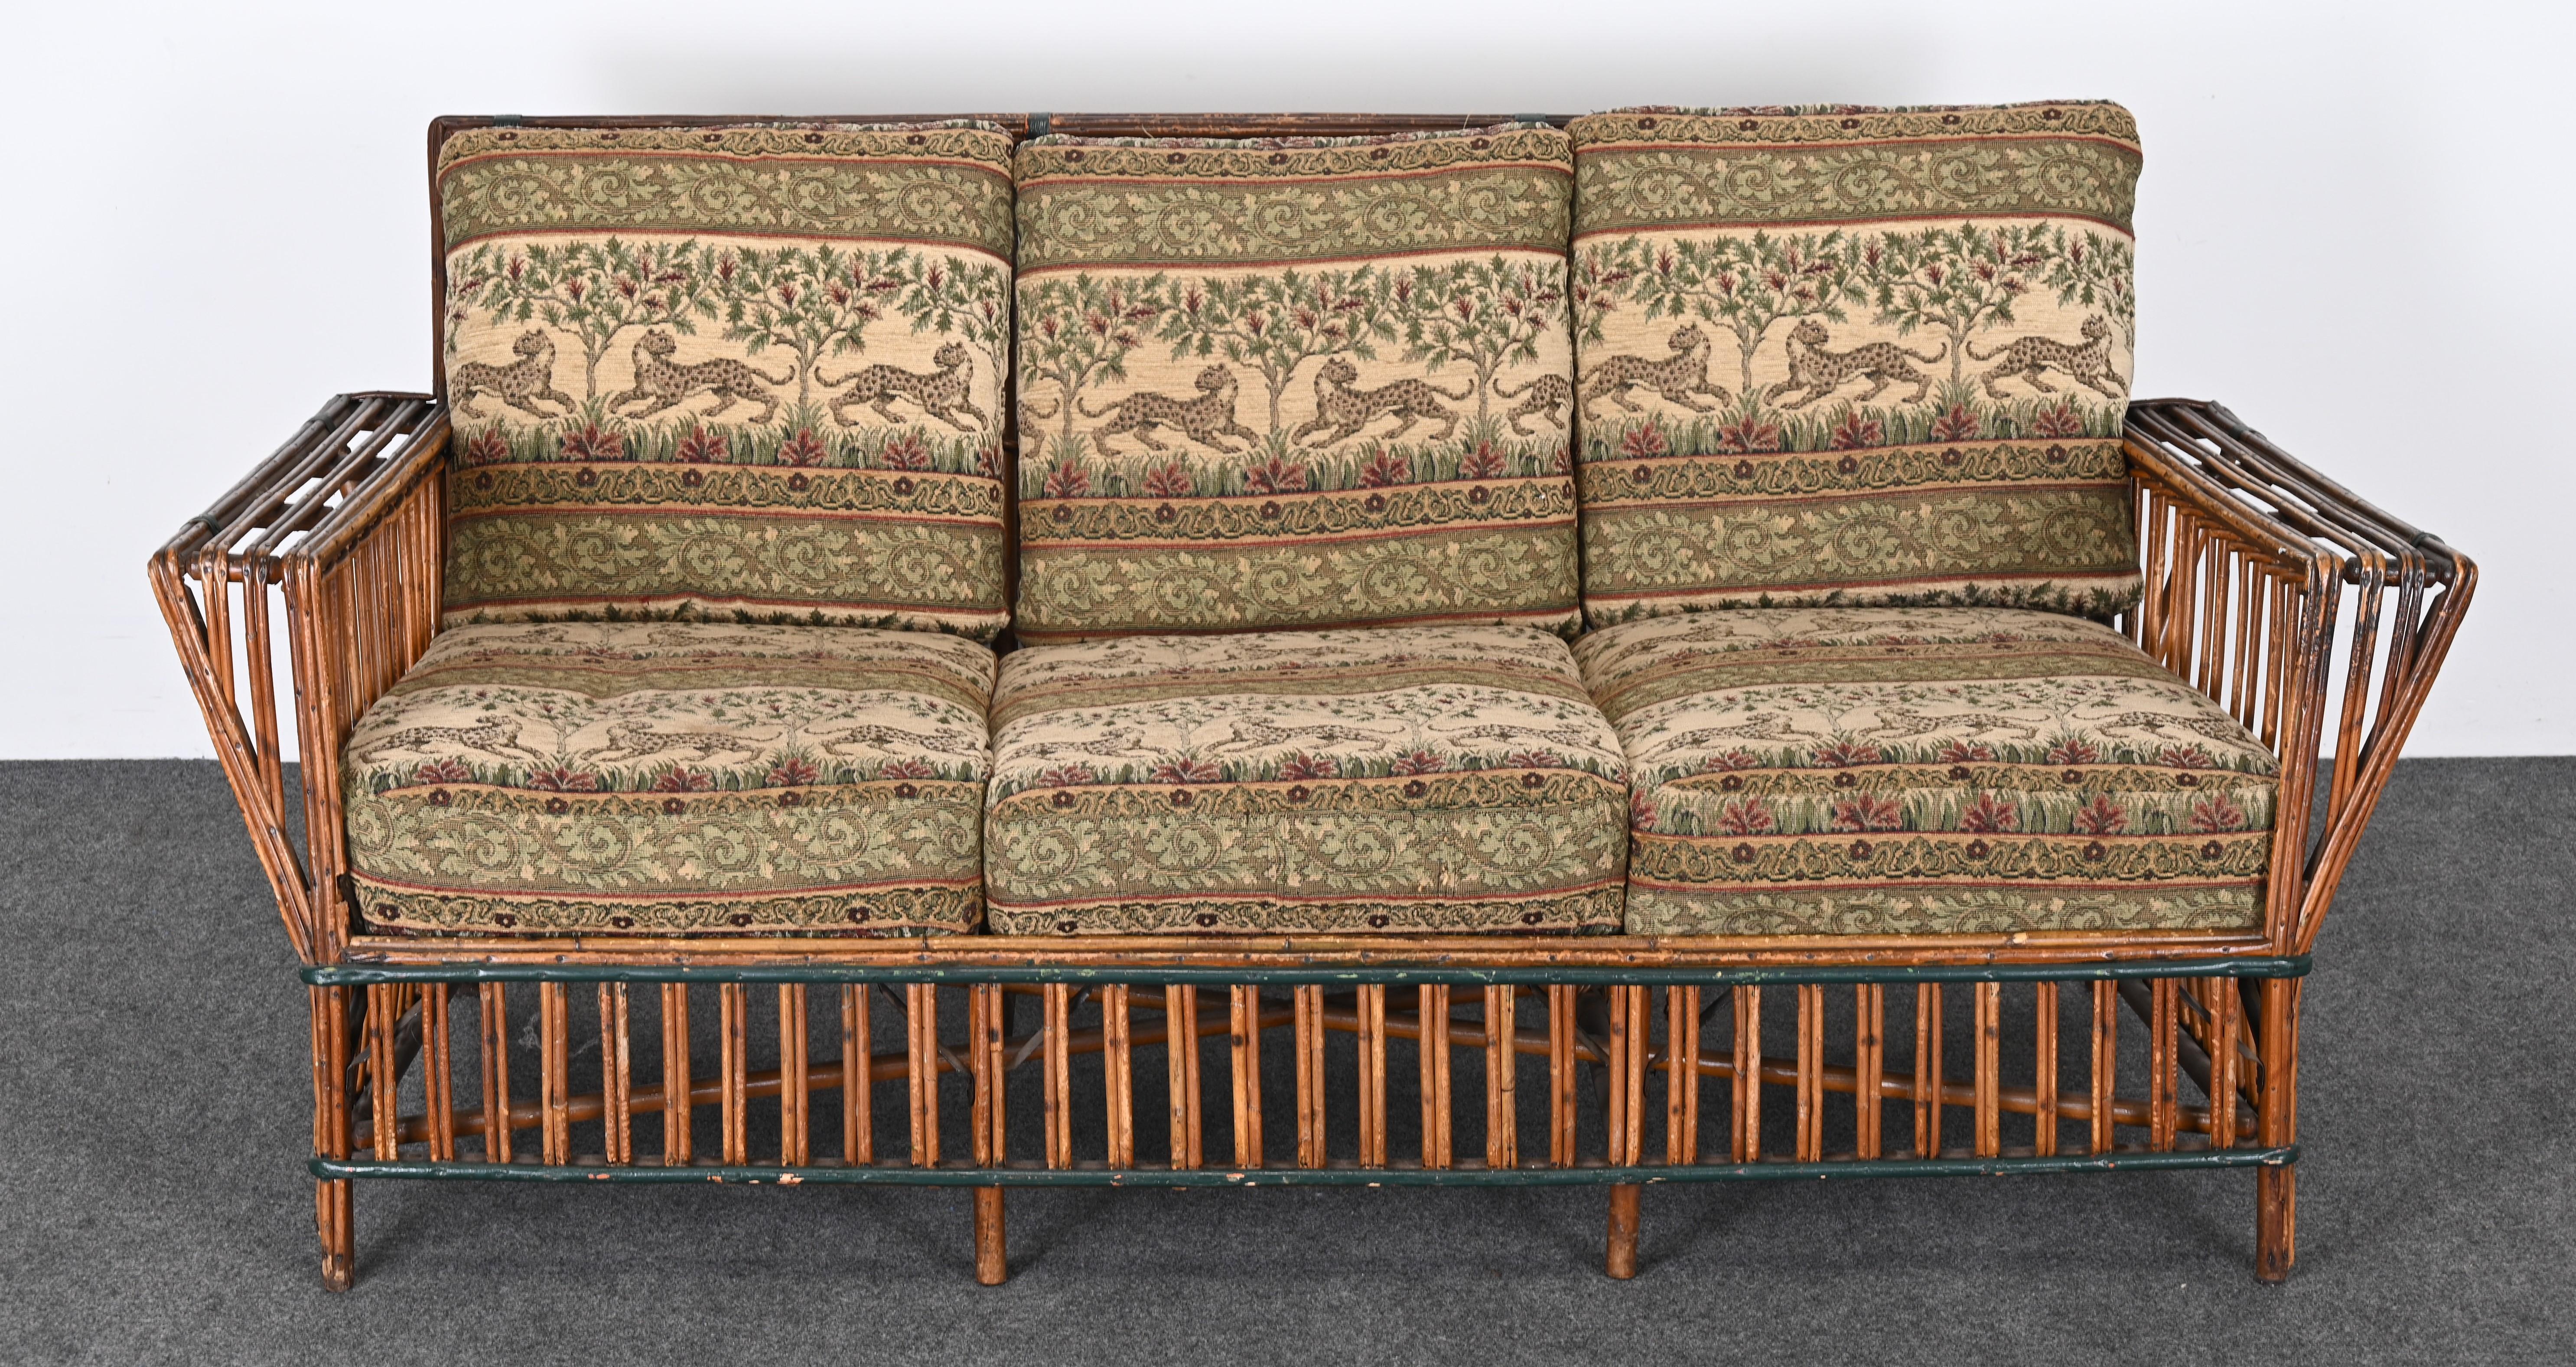 Art Deco Split Ypsilanti Stick Reed Wicker or Sofa with Pair Arm Chairs c. 1930s For Sale 9